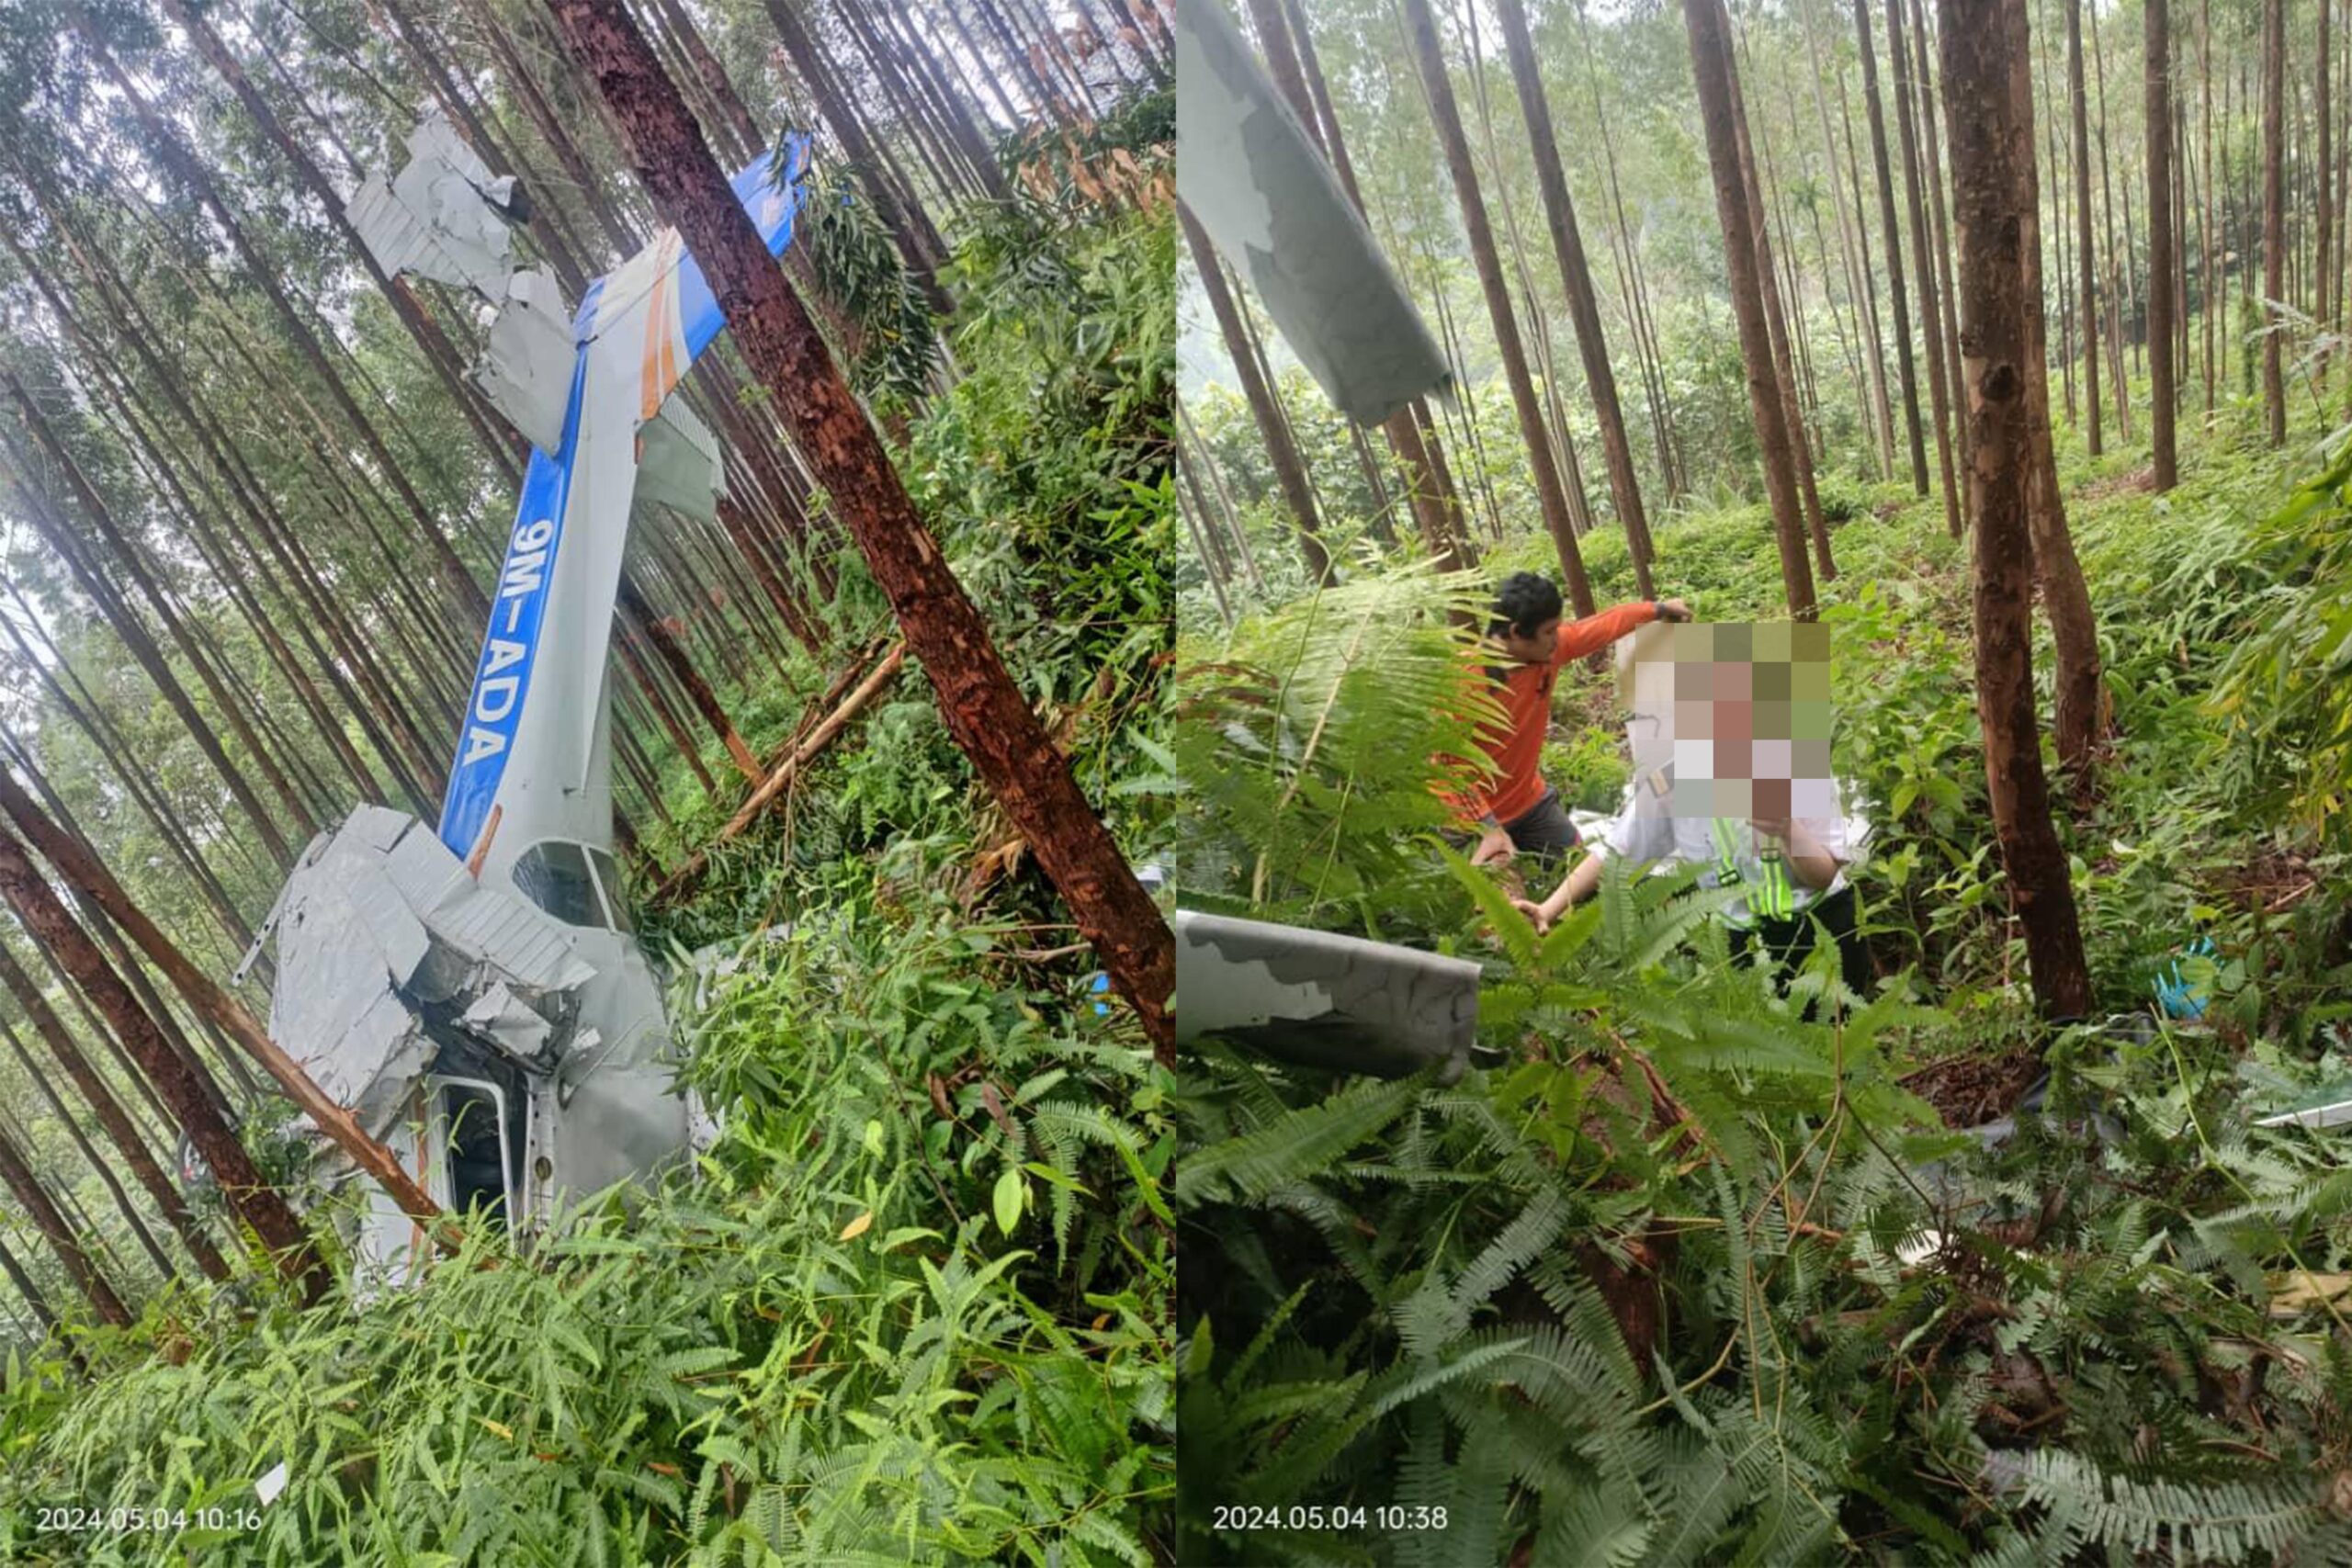 CAAM probing ‘overdue action’ by air traffic control in light plane crash in Sungkai